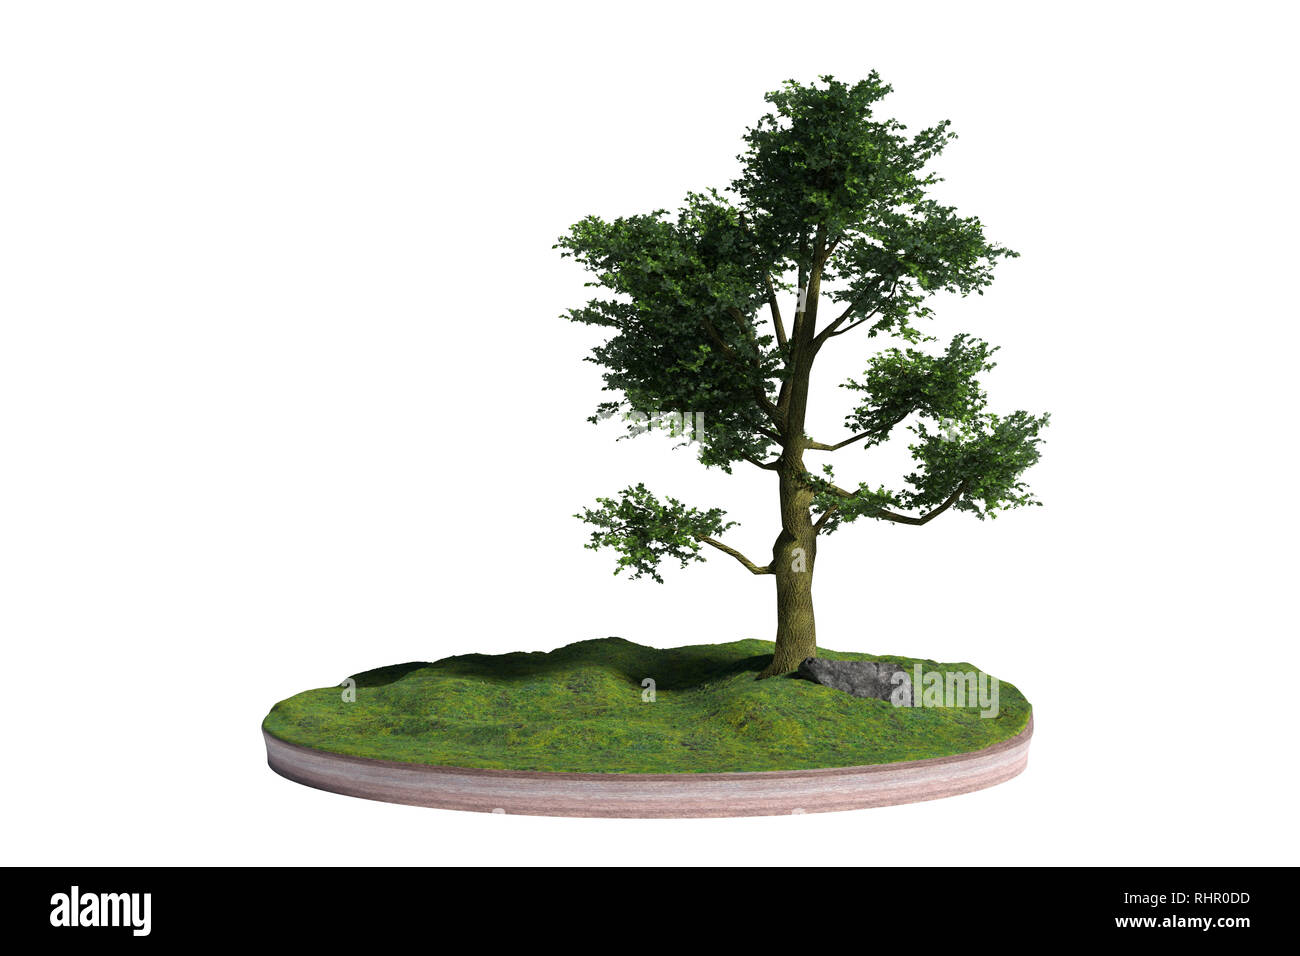 model of a cross section of ground with tree, rock and grass on the surface (3d illustration, isolated on white background) Stock Photo